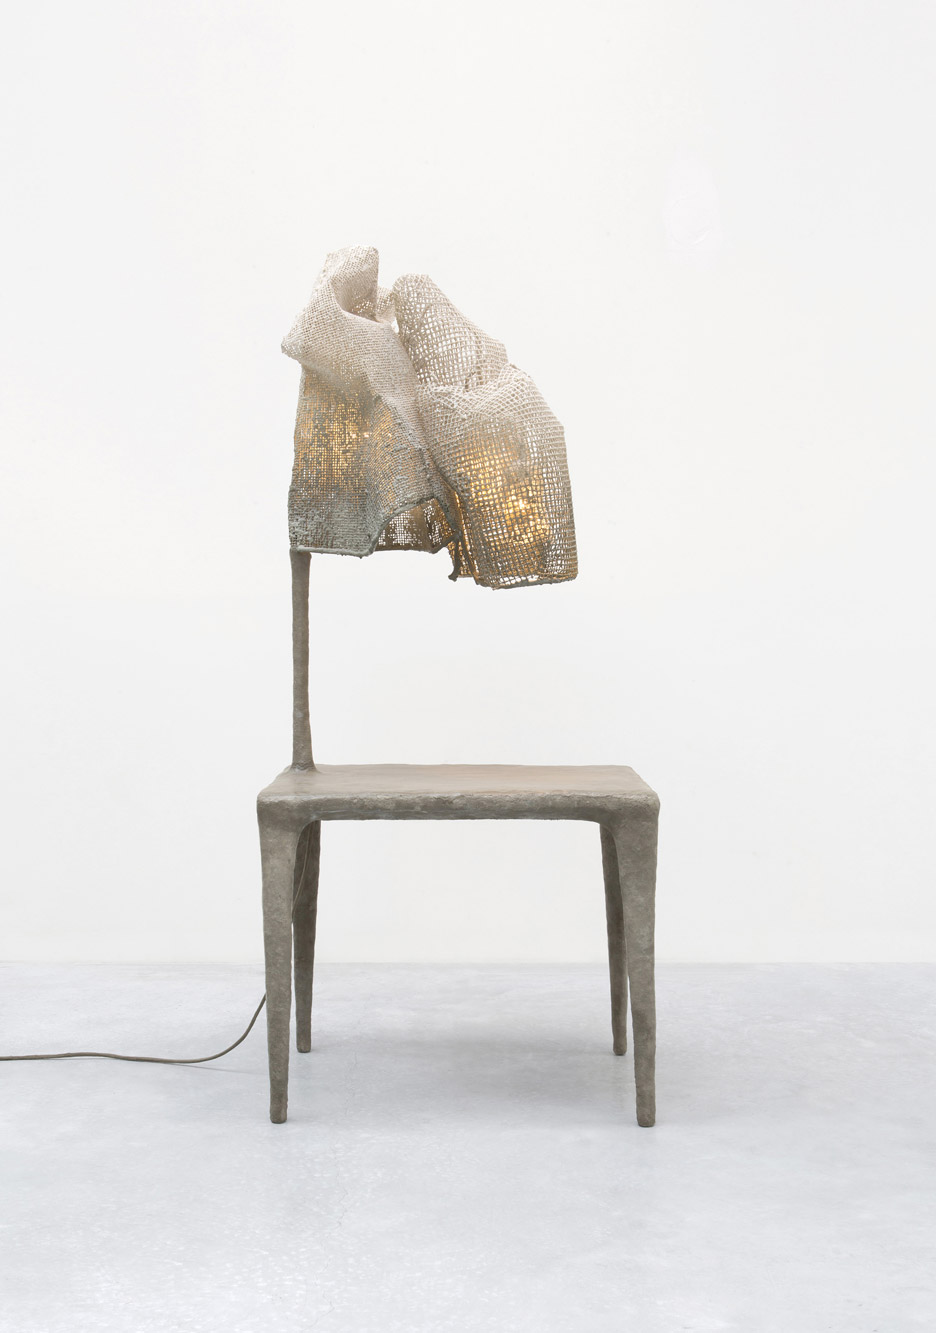 Nacho Carbonell Wraps Lamps In Mesh Cocoons For Carpenters Workshop Exhibition